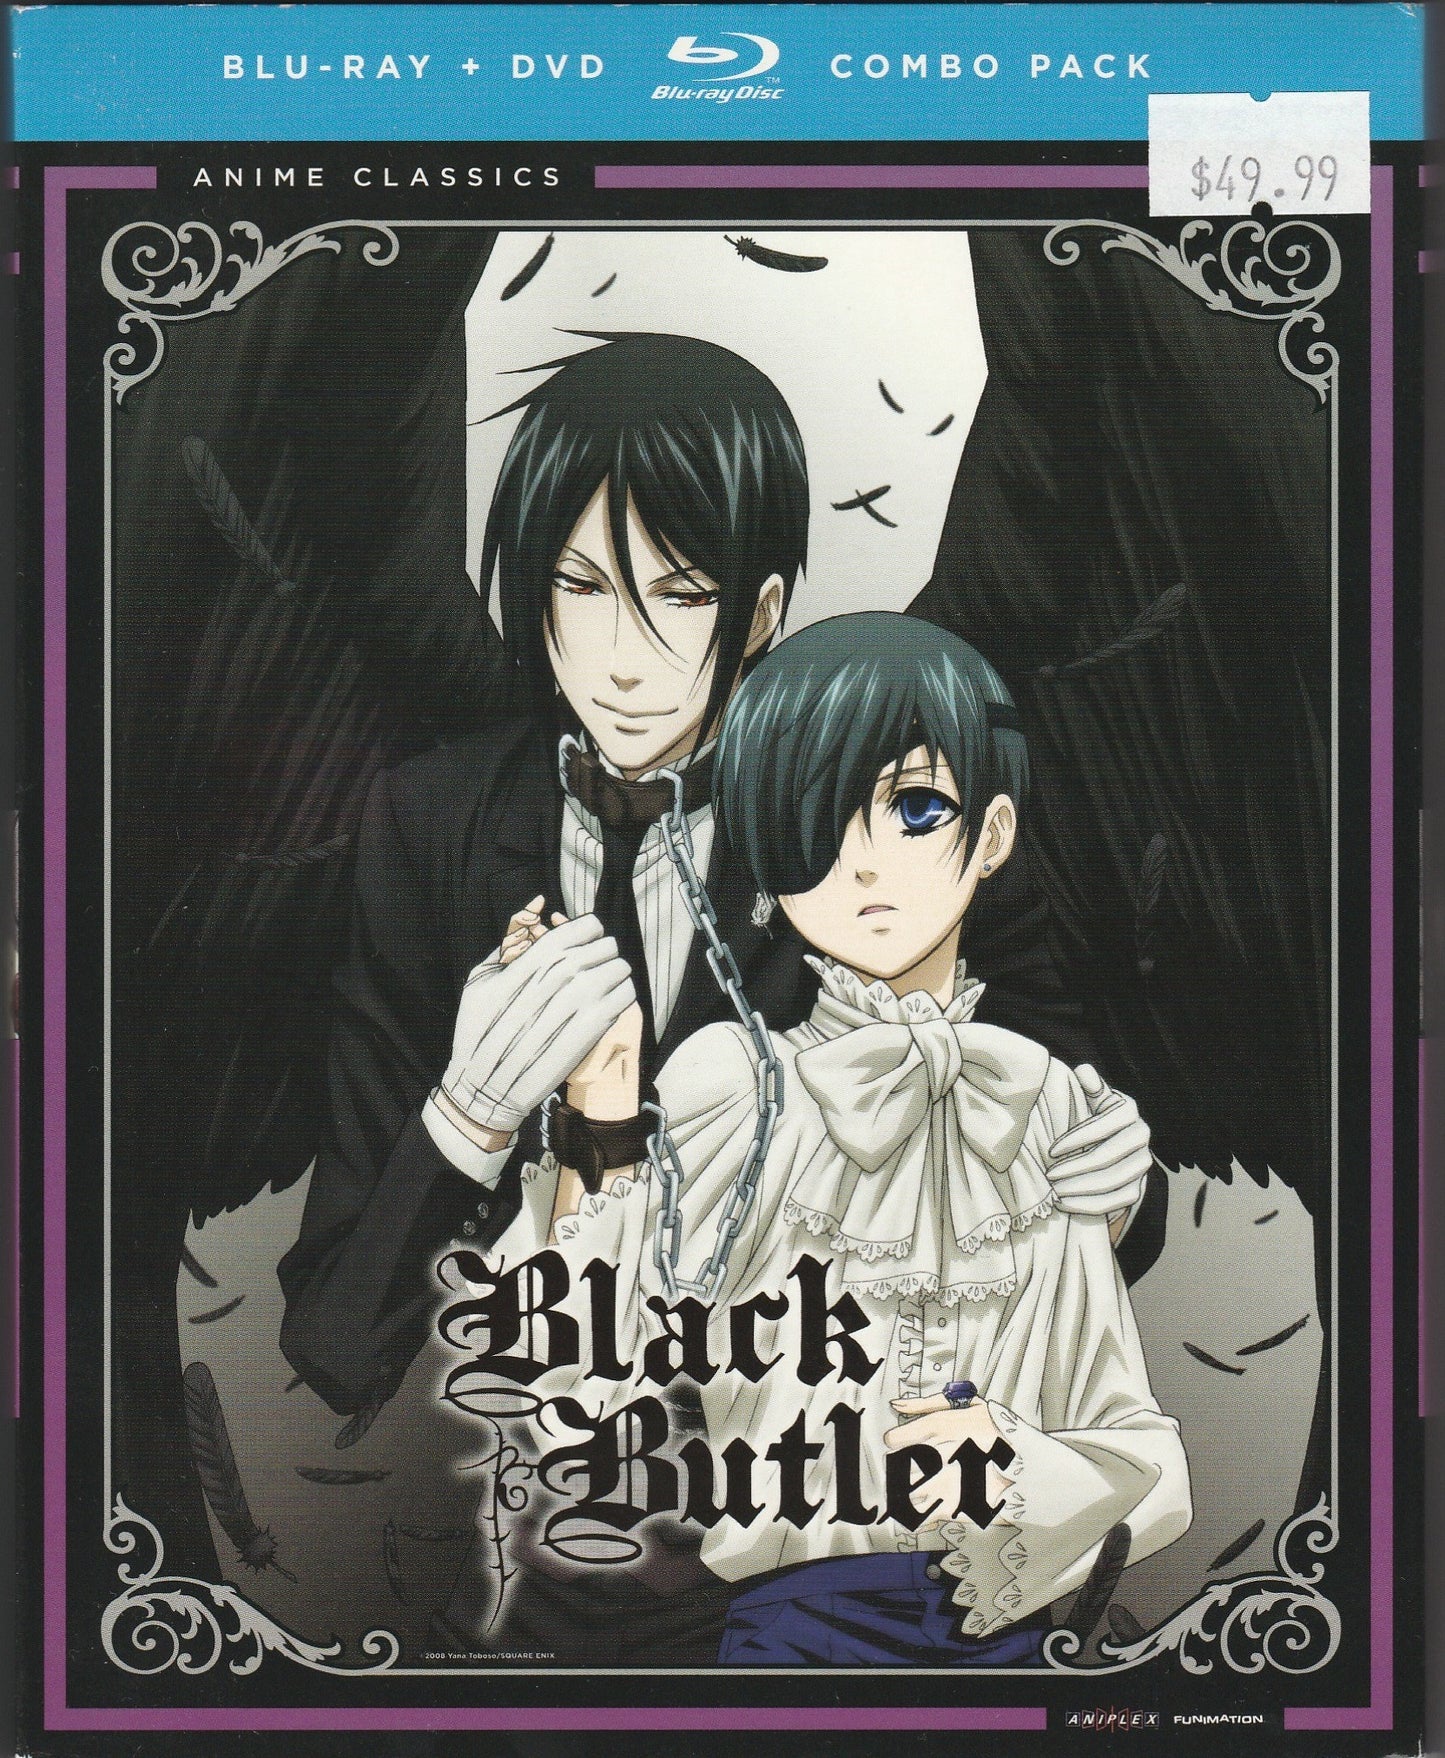 Black Butler Complete First Season Blu-ray/DVD Combo Pack